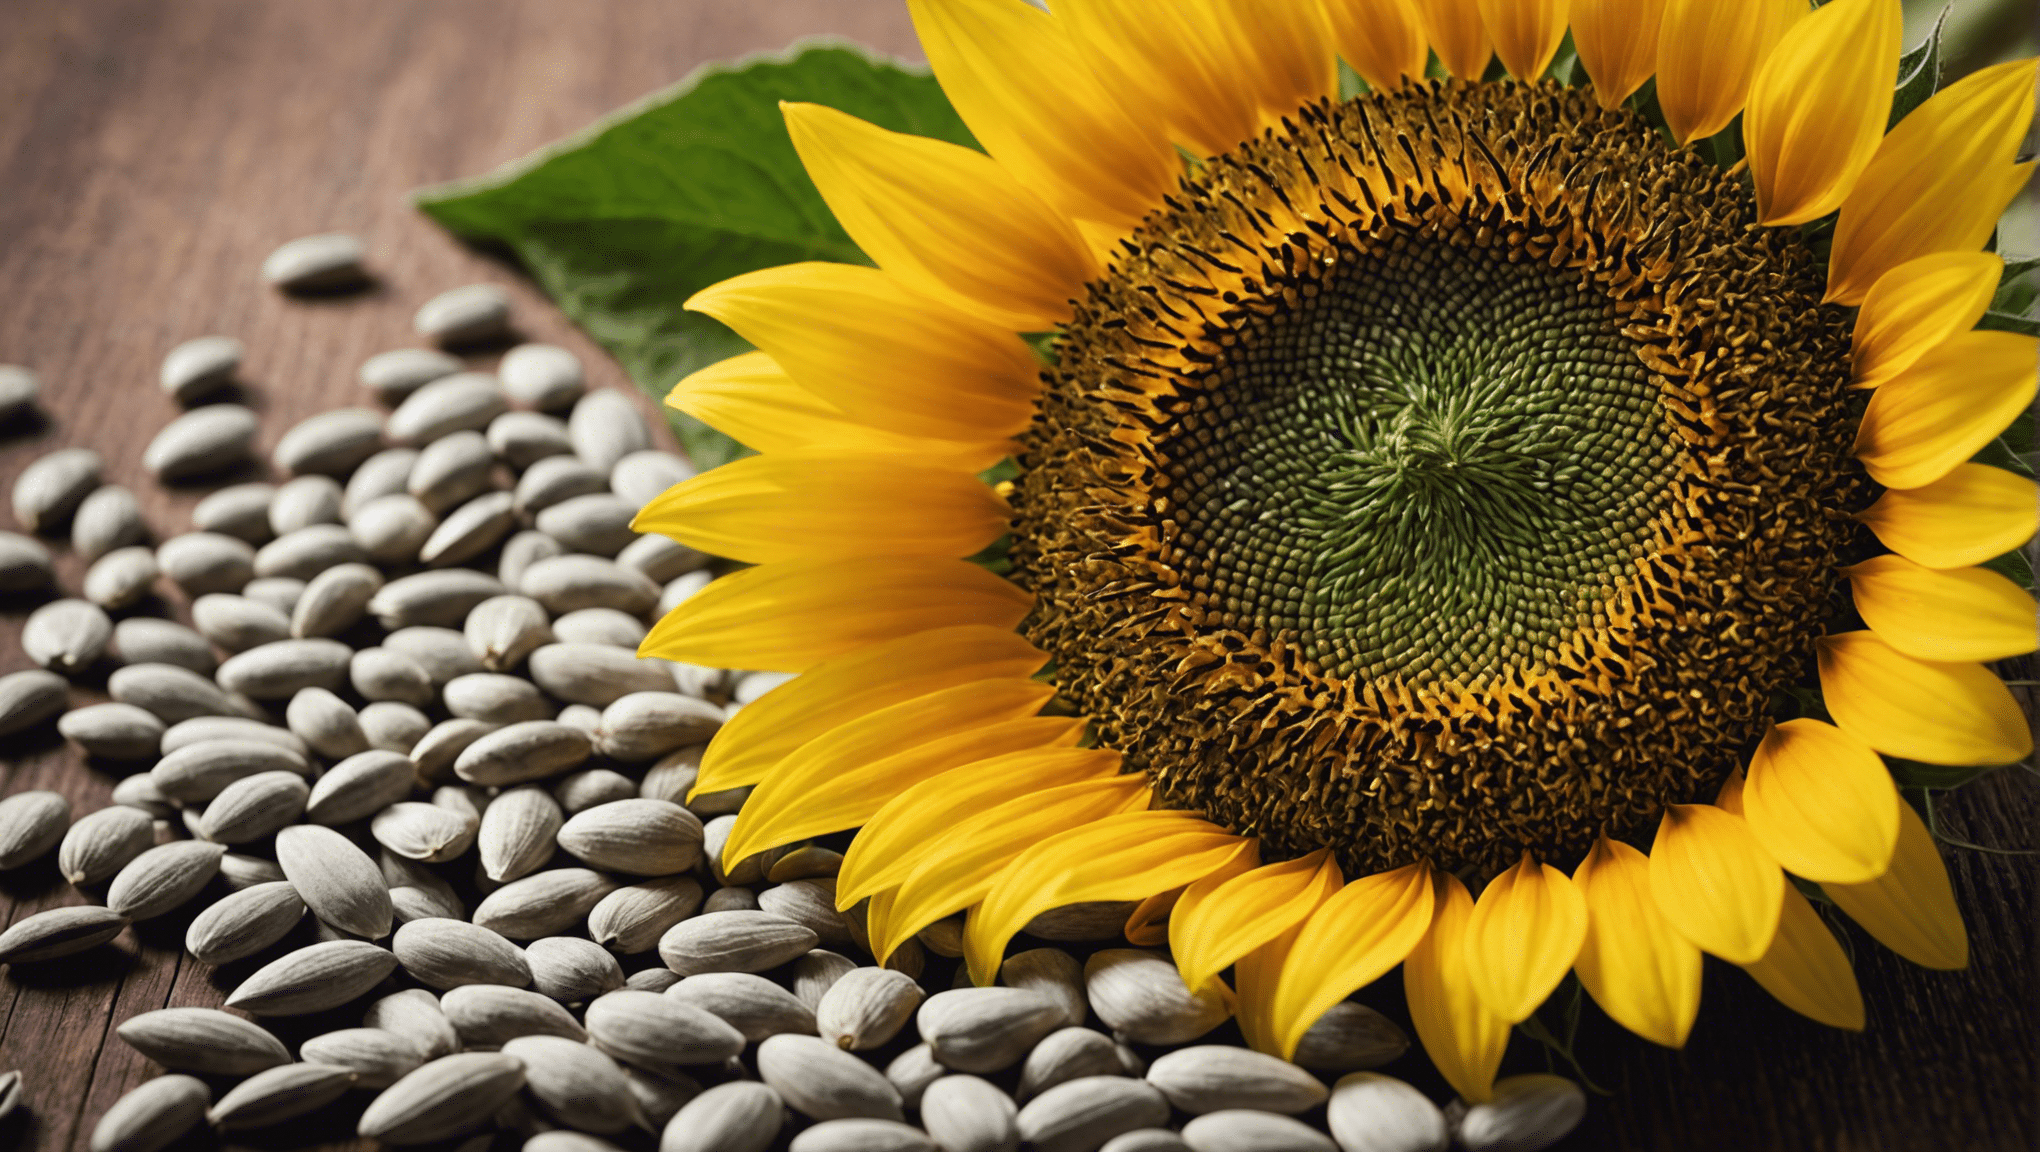 discover the potential of big sunflower seeds as the next superfood craze in this fascinating article.